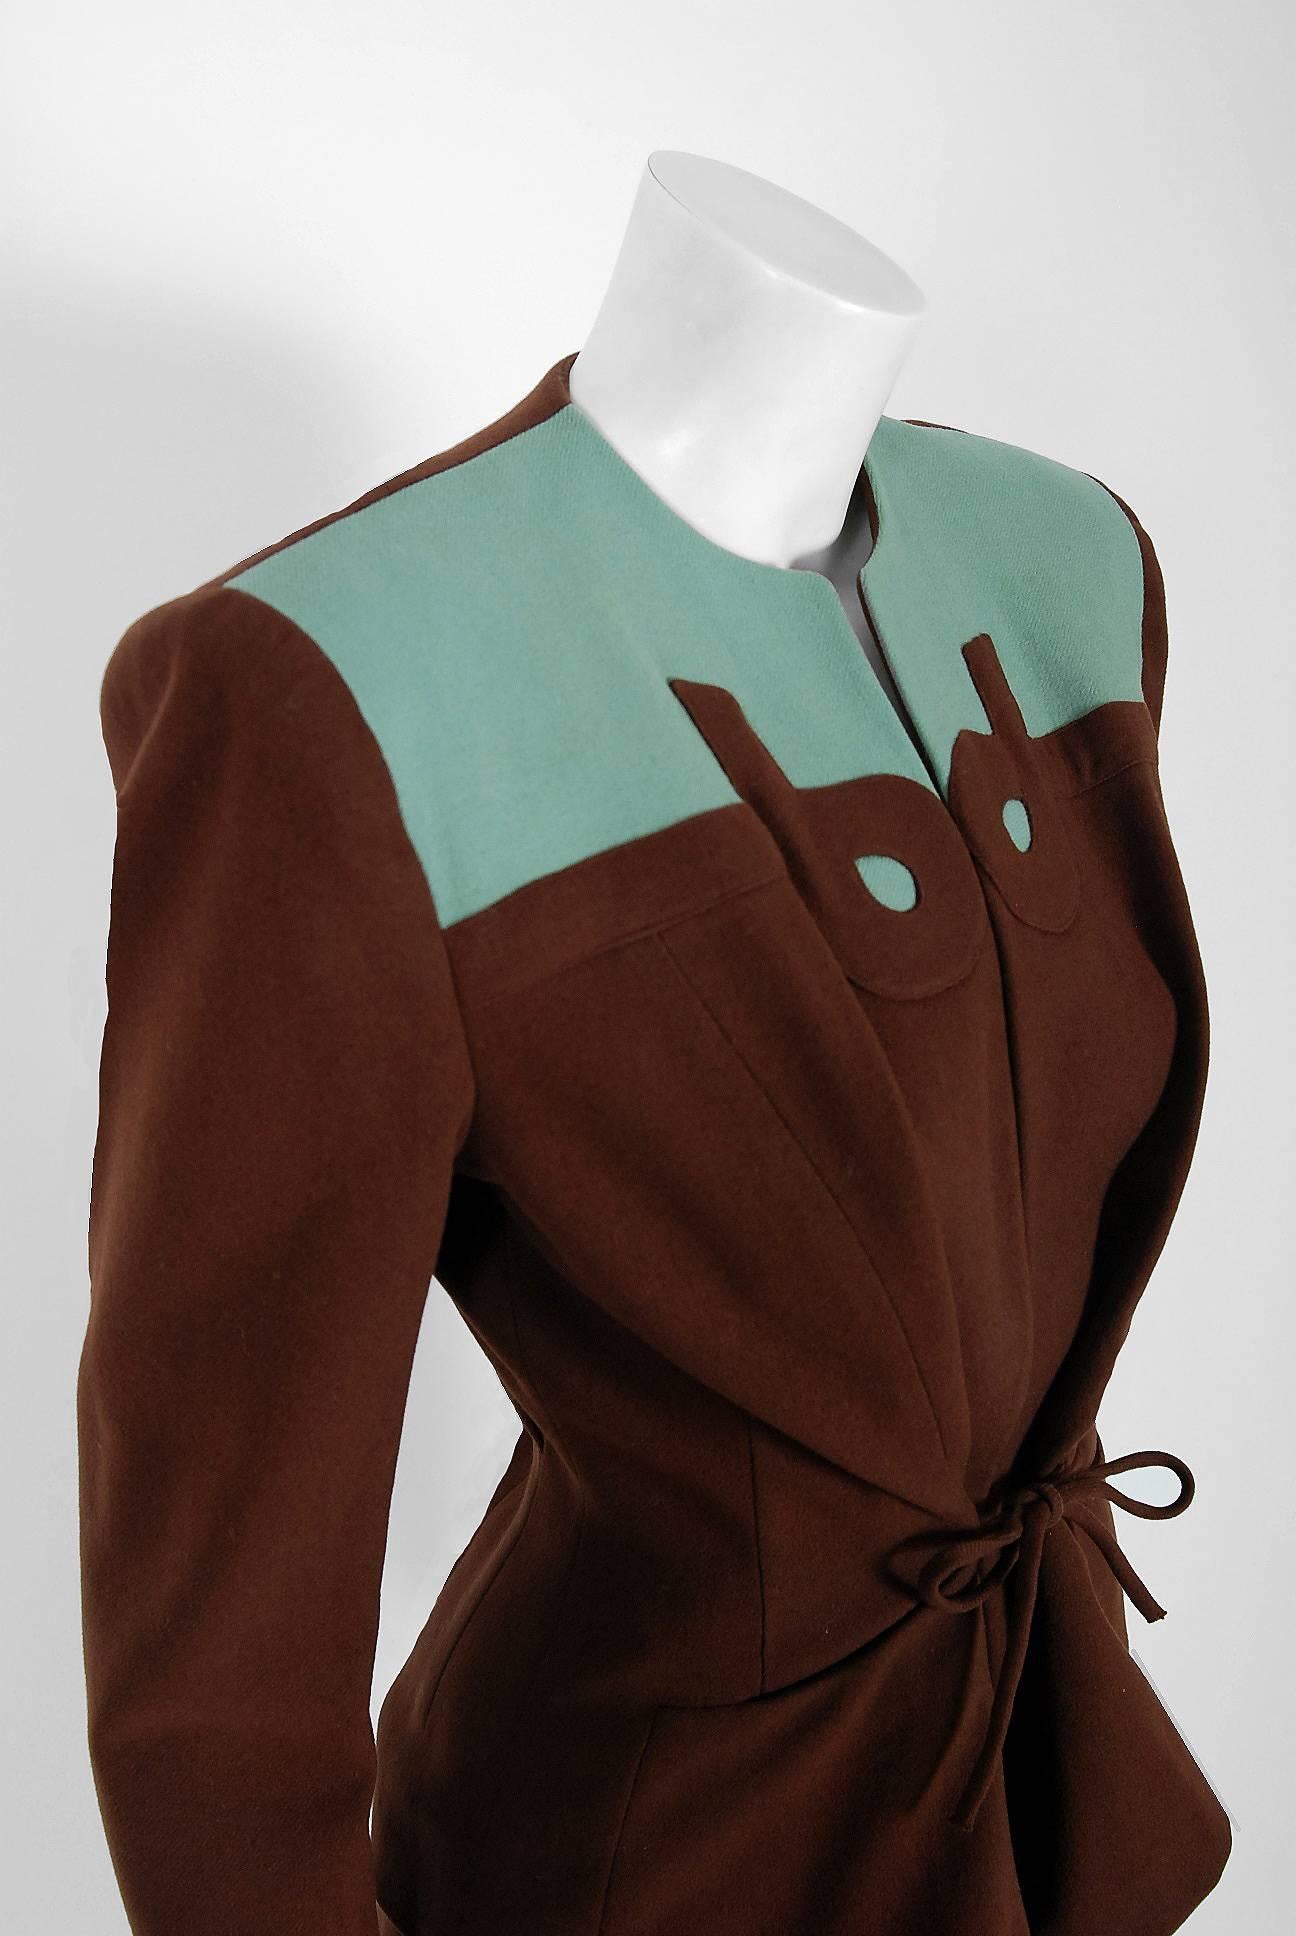 This stunning 1940's Audrey Alan Original two-piece ensemble is fashioned in turquoise blue and chocolate brown lined virgin-wool. The fabric itself is a masterpiece; vertical woven wool that seems to have an almost 3-dimensional feel without being